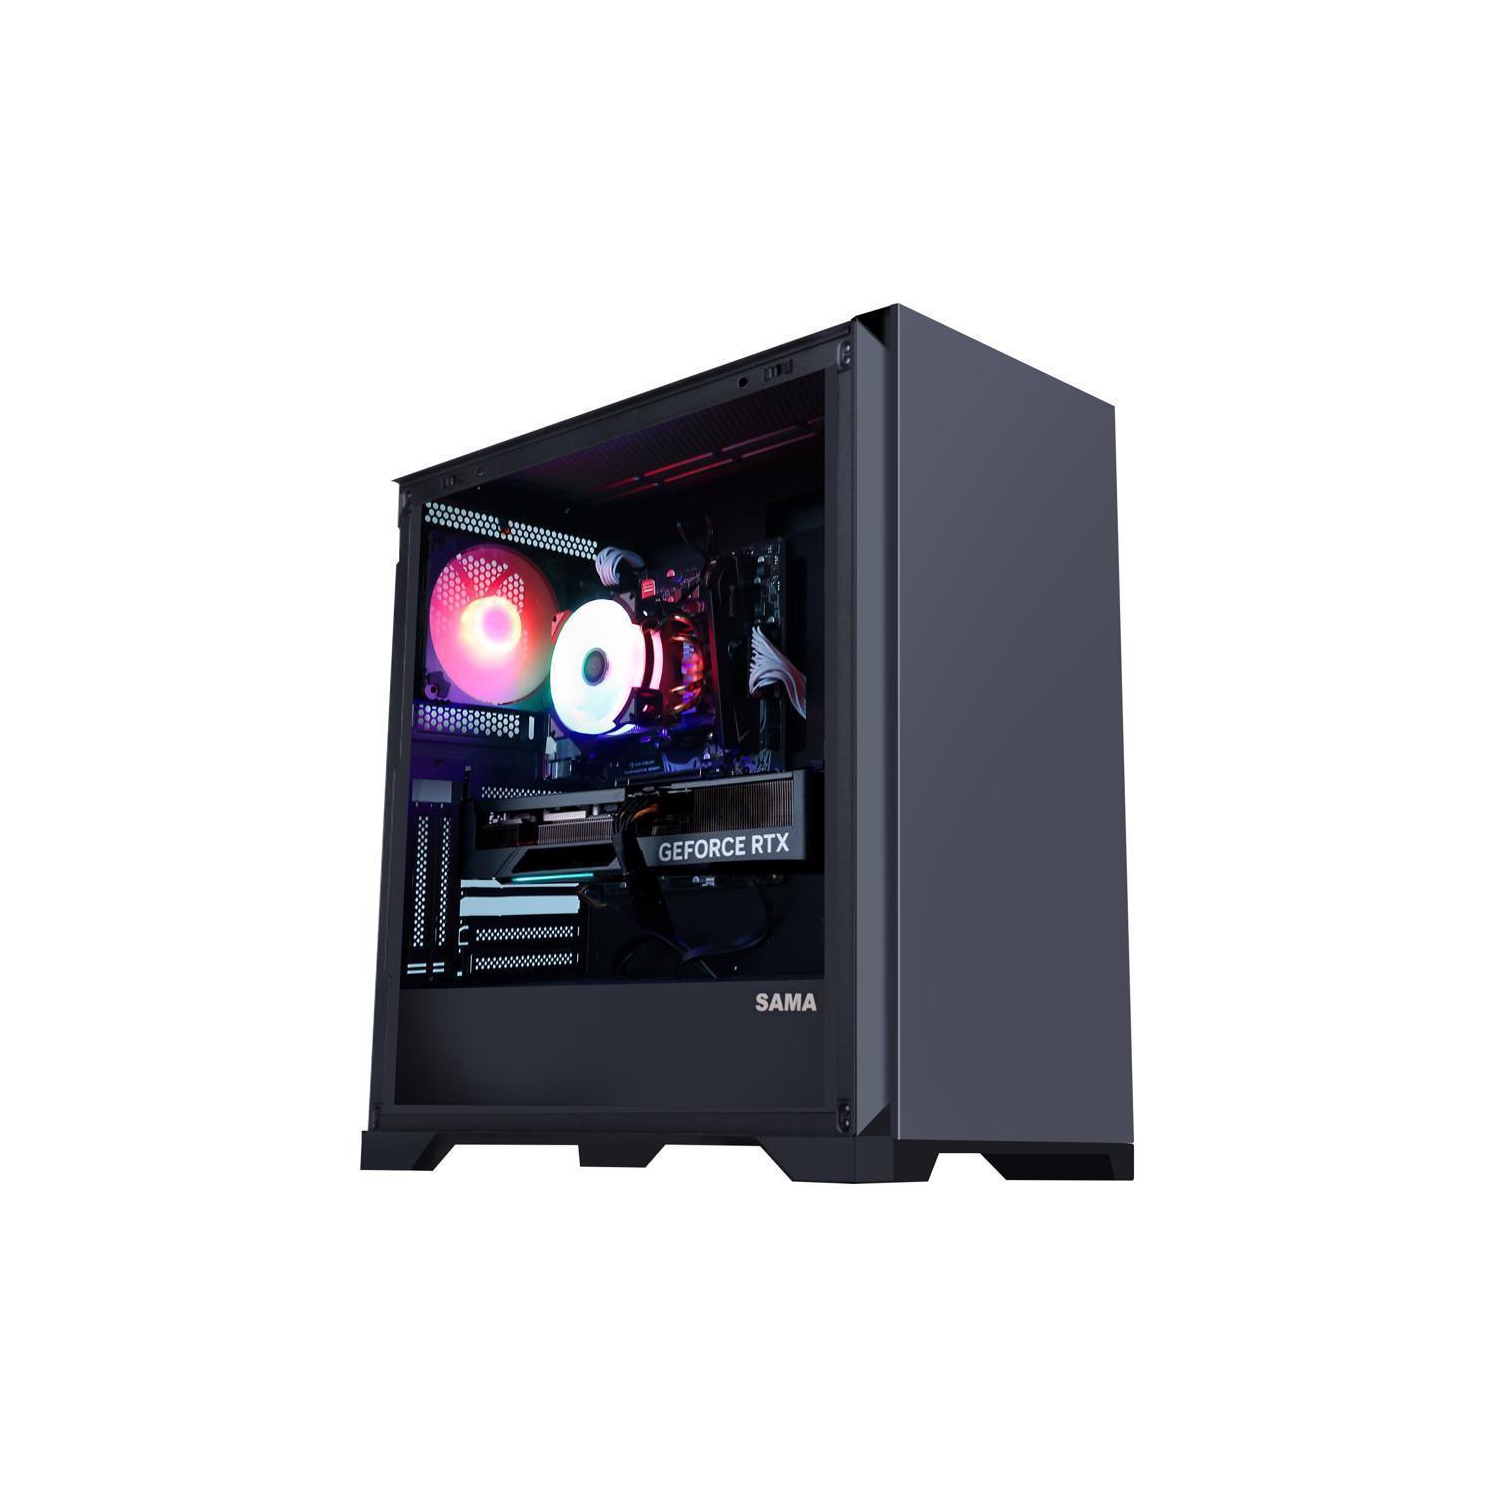 Hoengager Ares Gaming - Intel Core i5-12400F 6-Core 2.5 GHz-NVIDIA GeForce RTX 3060 Ti- 16GB DDR4 3200MHz -500GB M.2 + 2TB 2.5'' SATA SSD- WIFI -RGB Fans - Windows 11 Pro Computer